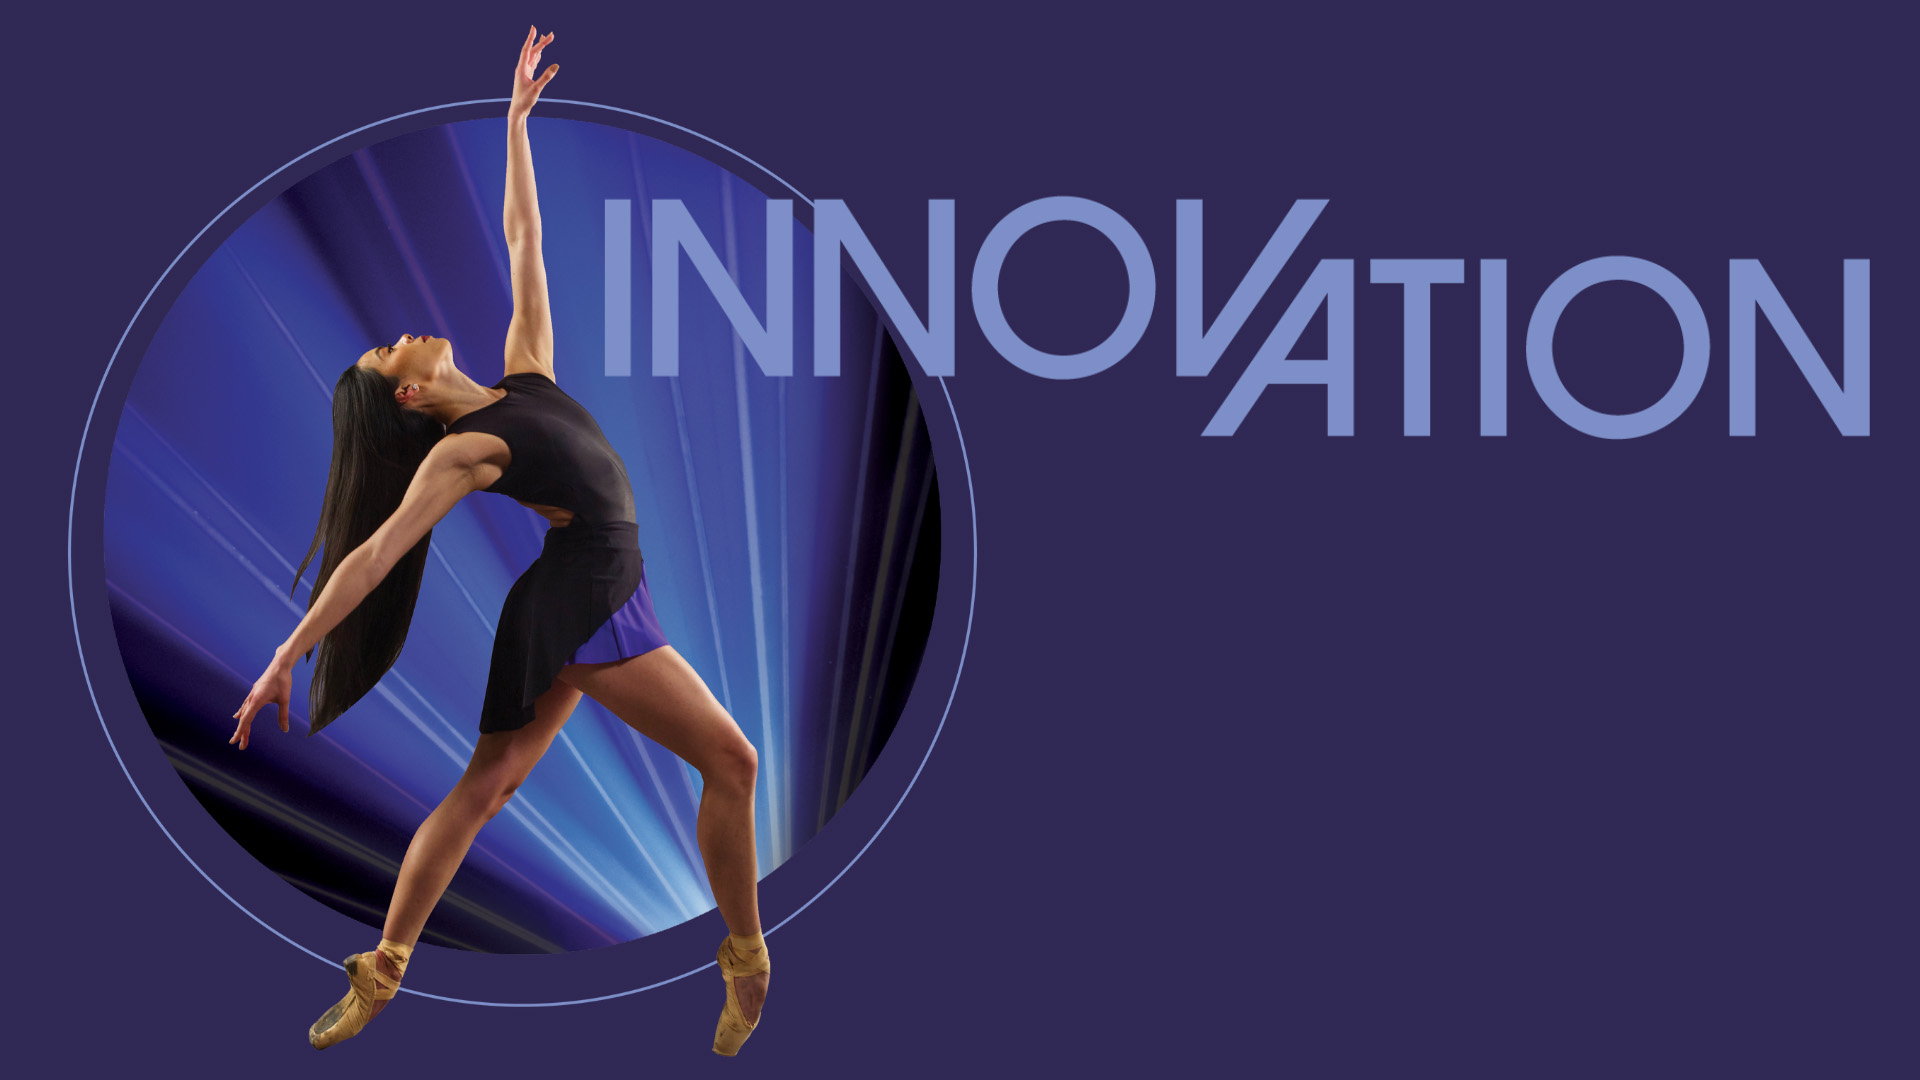 Banner text reads: Innovation. A dancer in a dark outfit with long dark hair strikes a pose against a dark blue background.